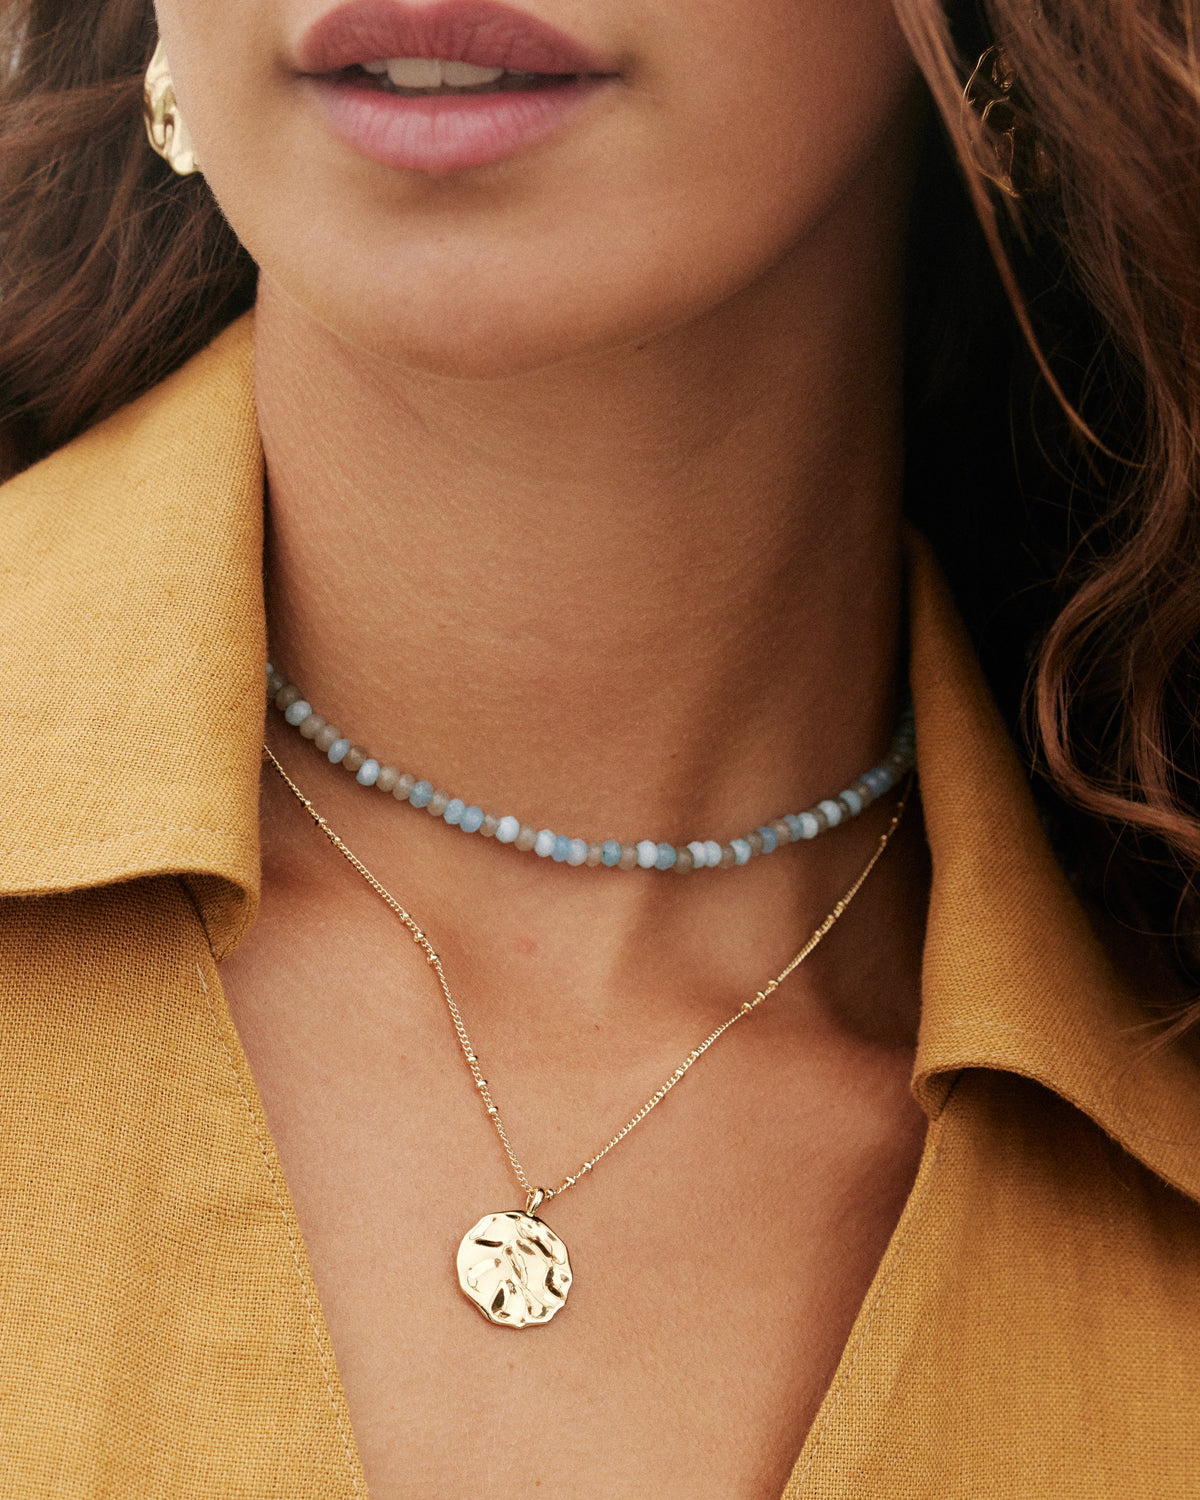 7 Ocean-Inspired Jewelry to Fall in Love With